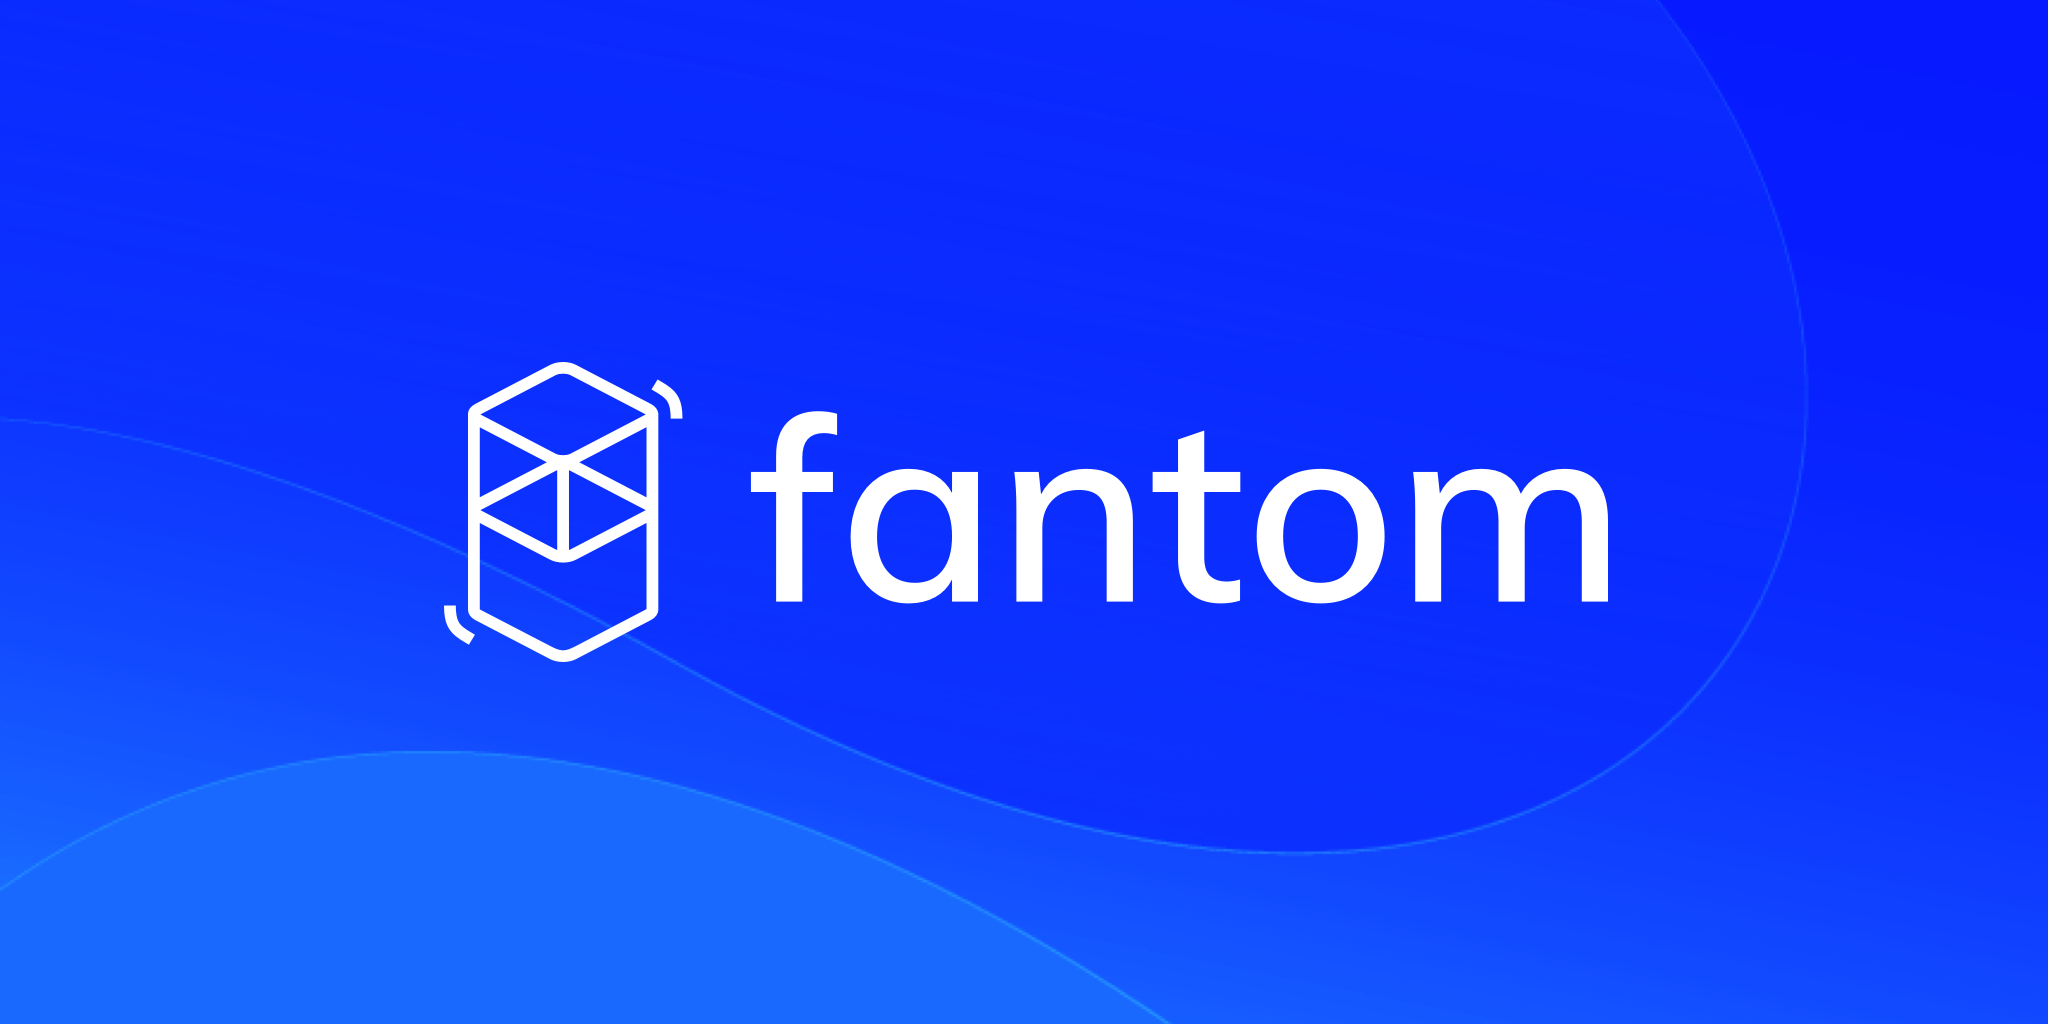 Fantom Crypto News: Google Is Wading Into The World Of Crypto, But When Will They Stop?